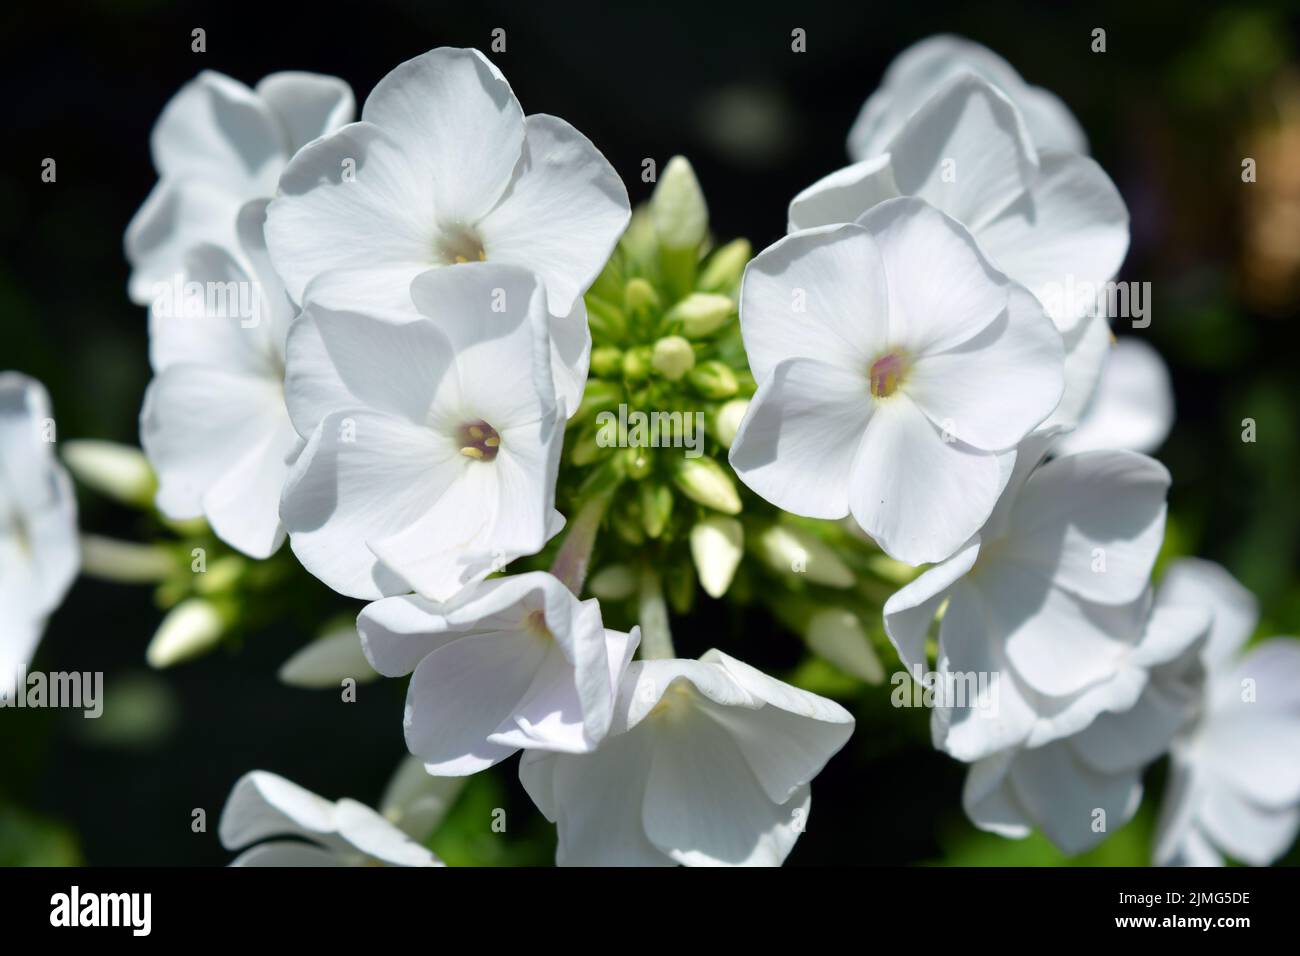 Bright white festive wedding flowers bloom only in summer. Many bright small light phlox growing in the home garden. Stock Photo